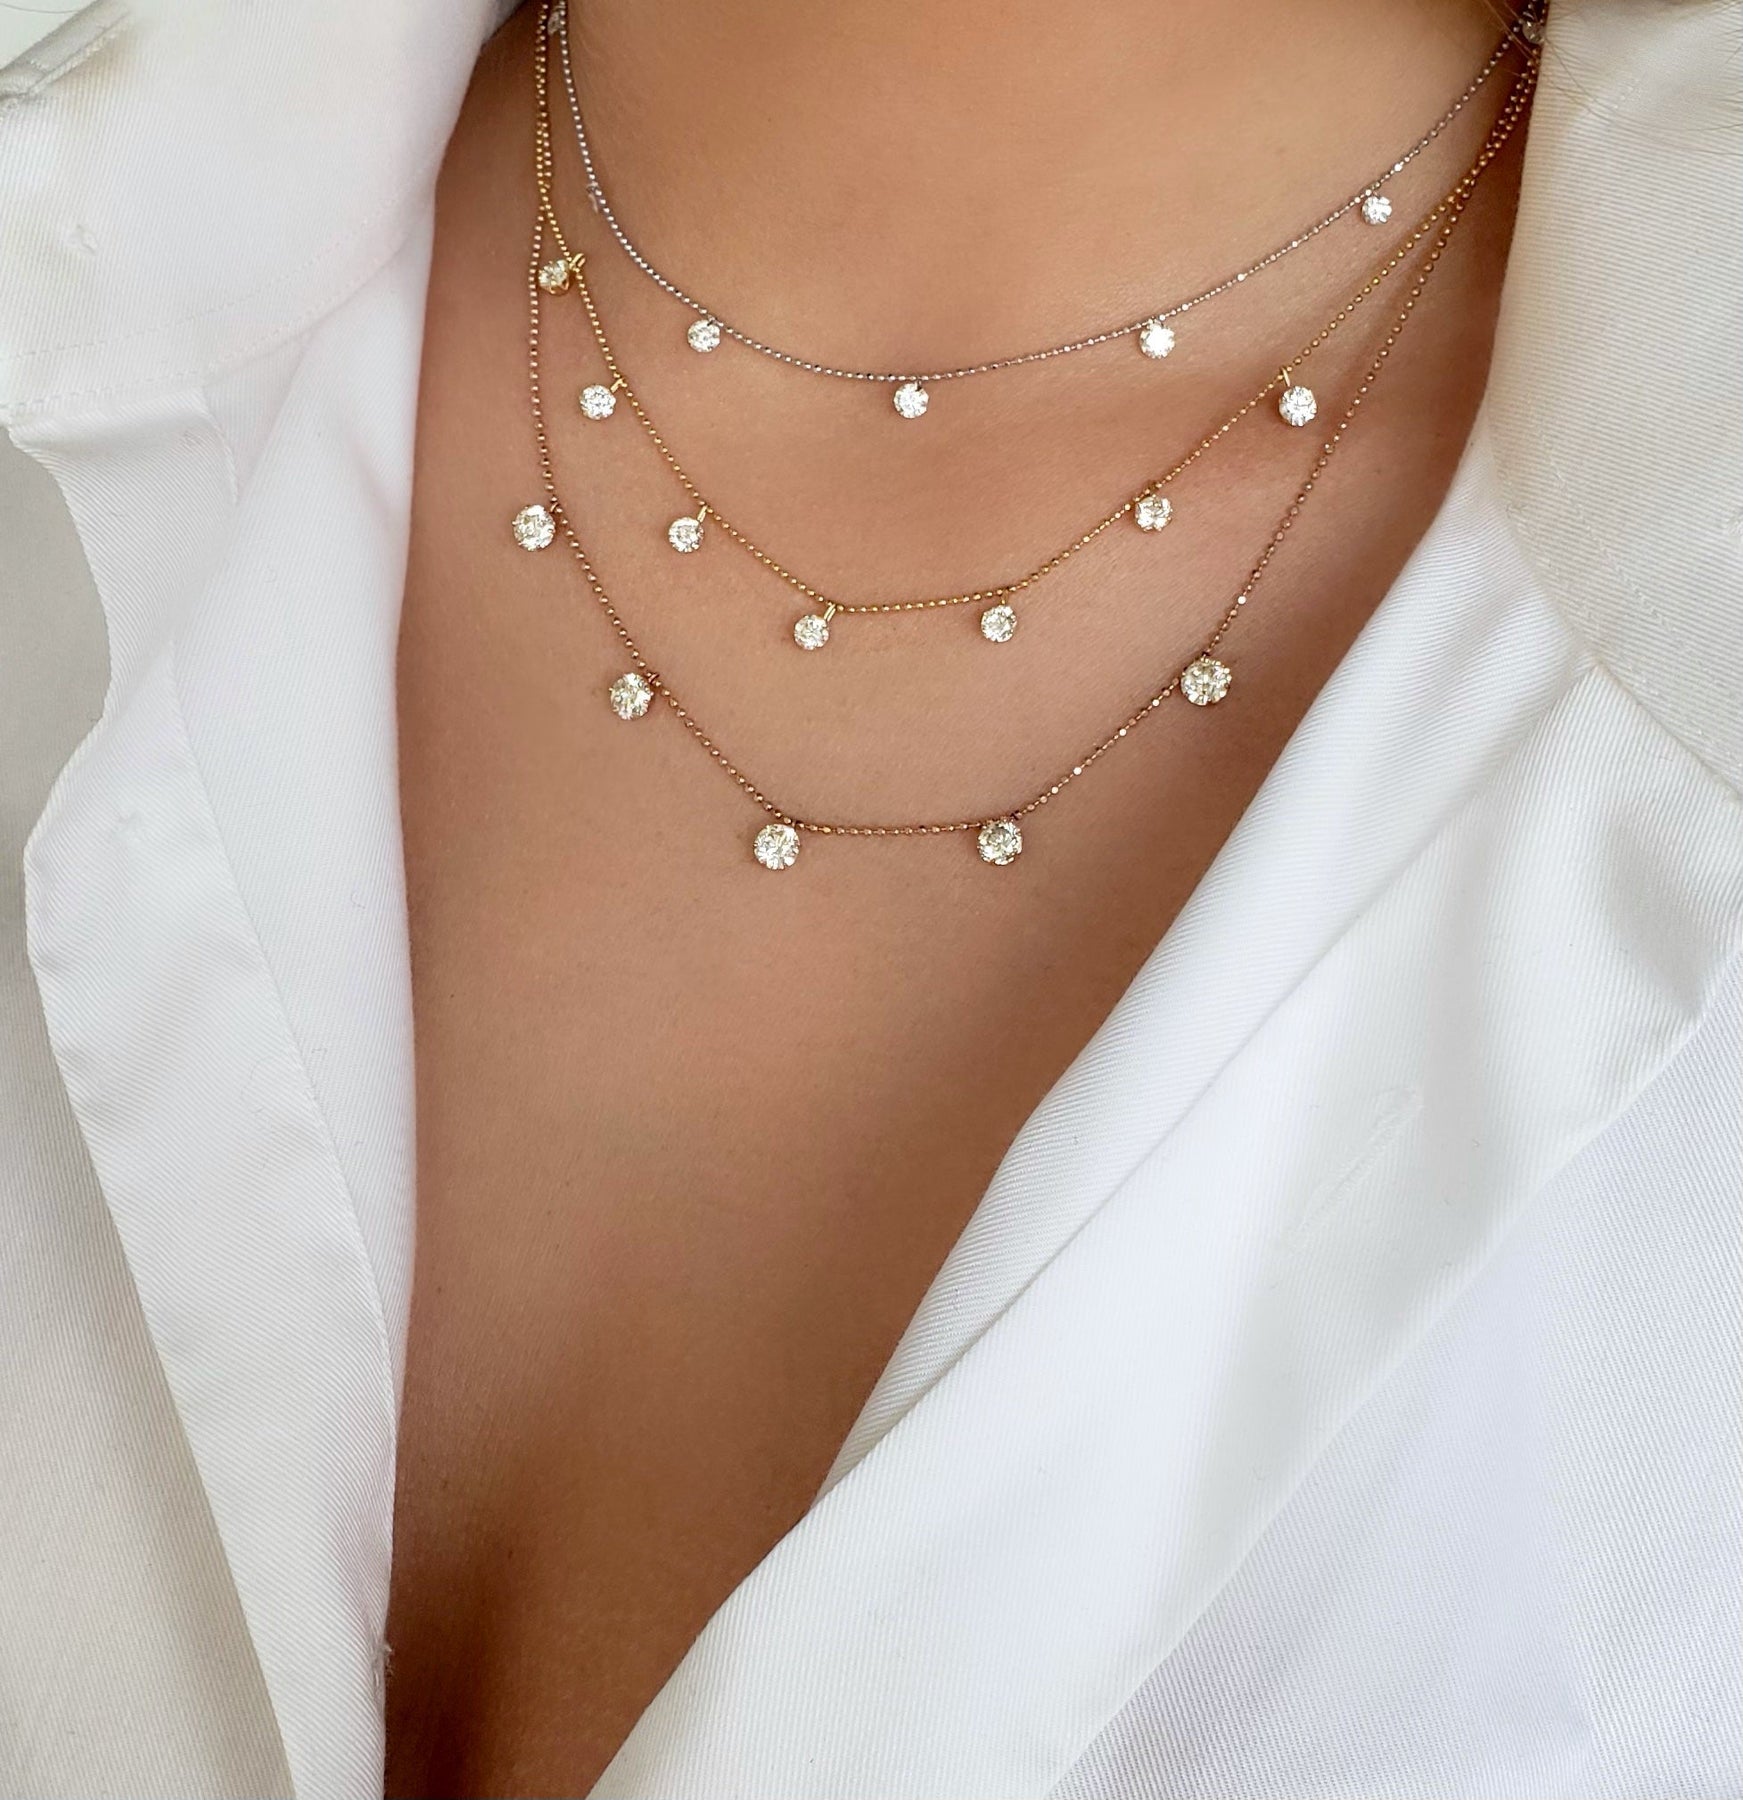 Small Floating Diamond Necklace – The Vault Nantucket